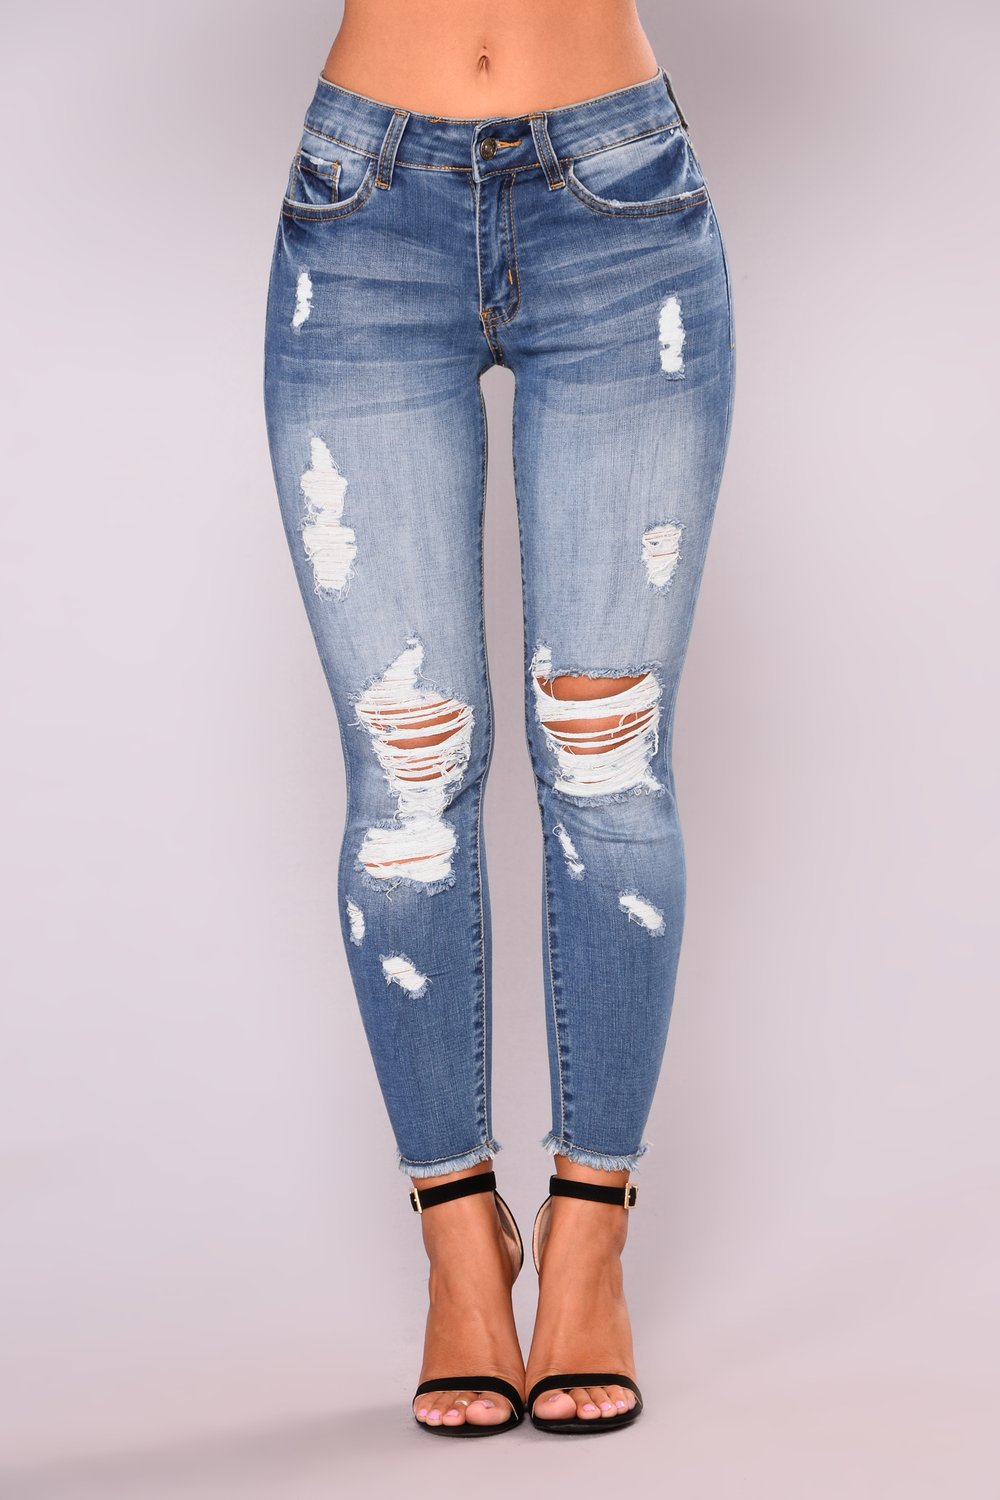 Summer High Street Hipster Elastic Cropped Ripped Women's Skinny Hip Fashion Jeans